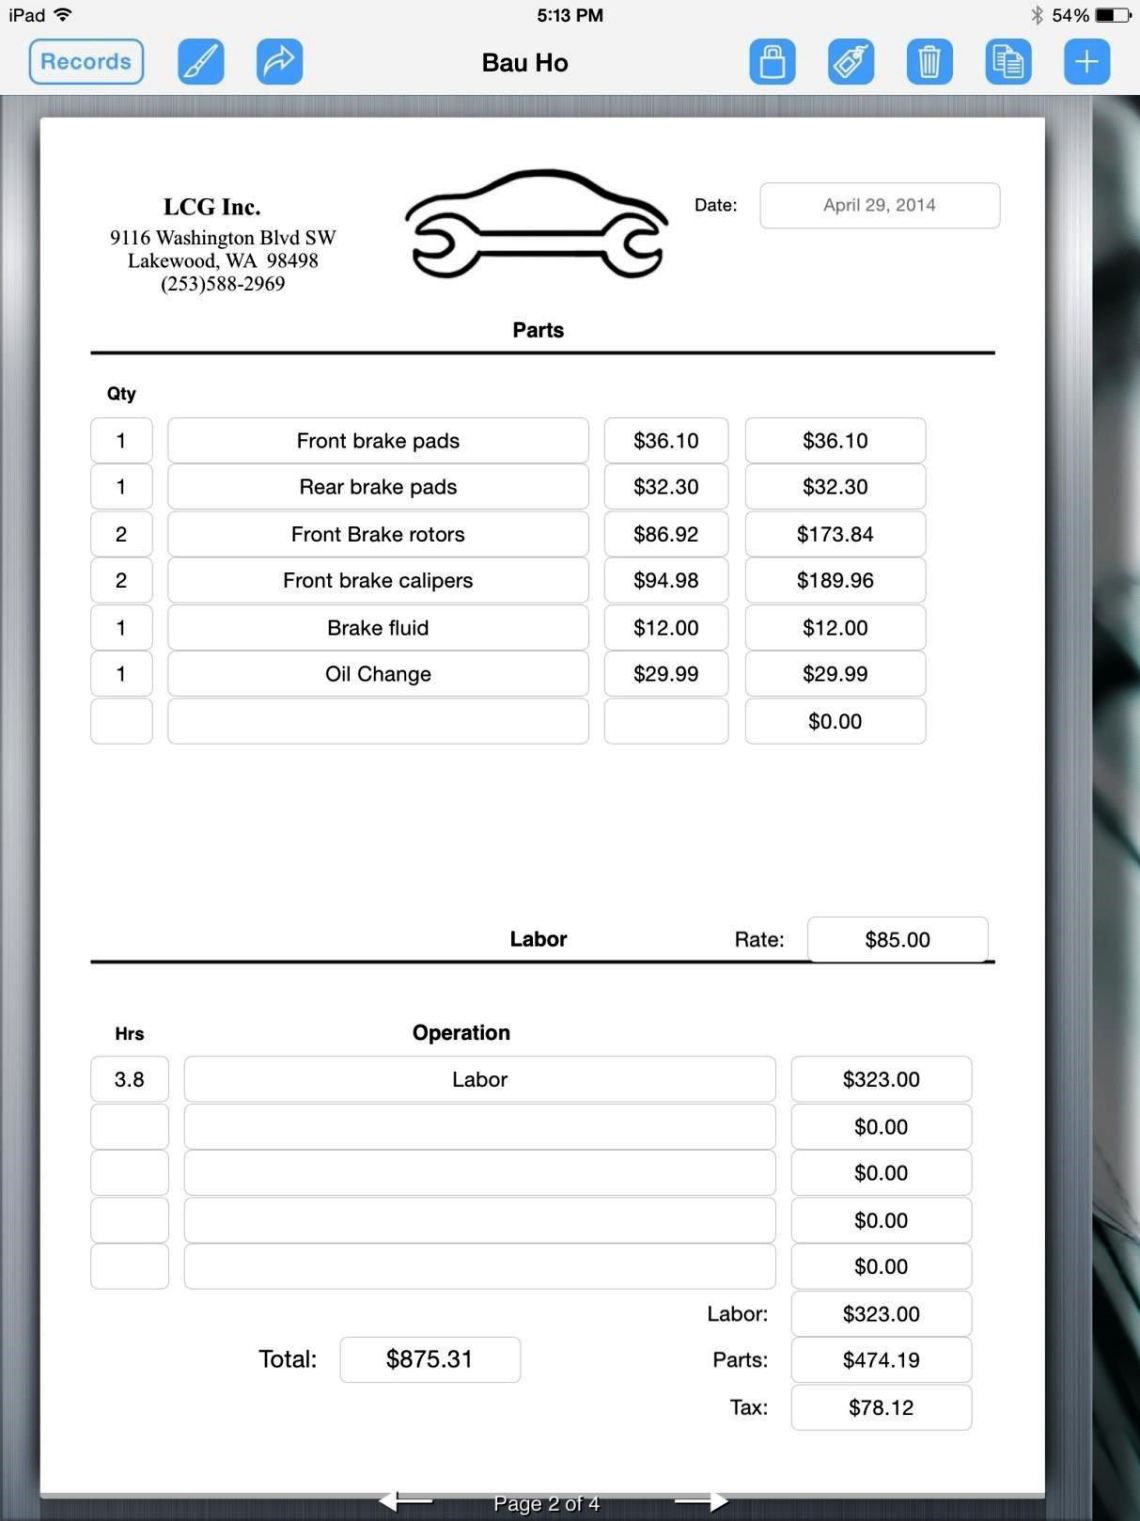 get our printable car towing receipt template invoice free towing